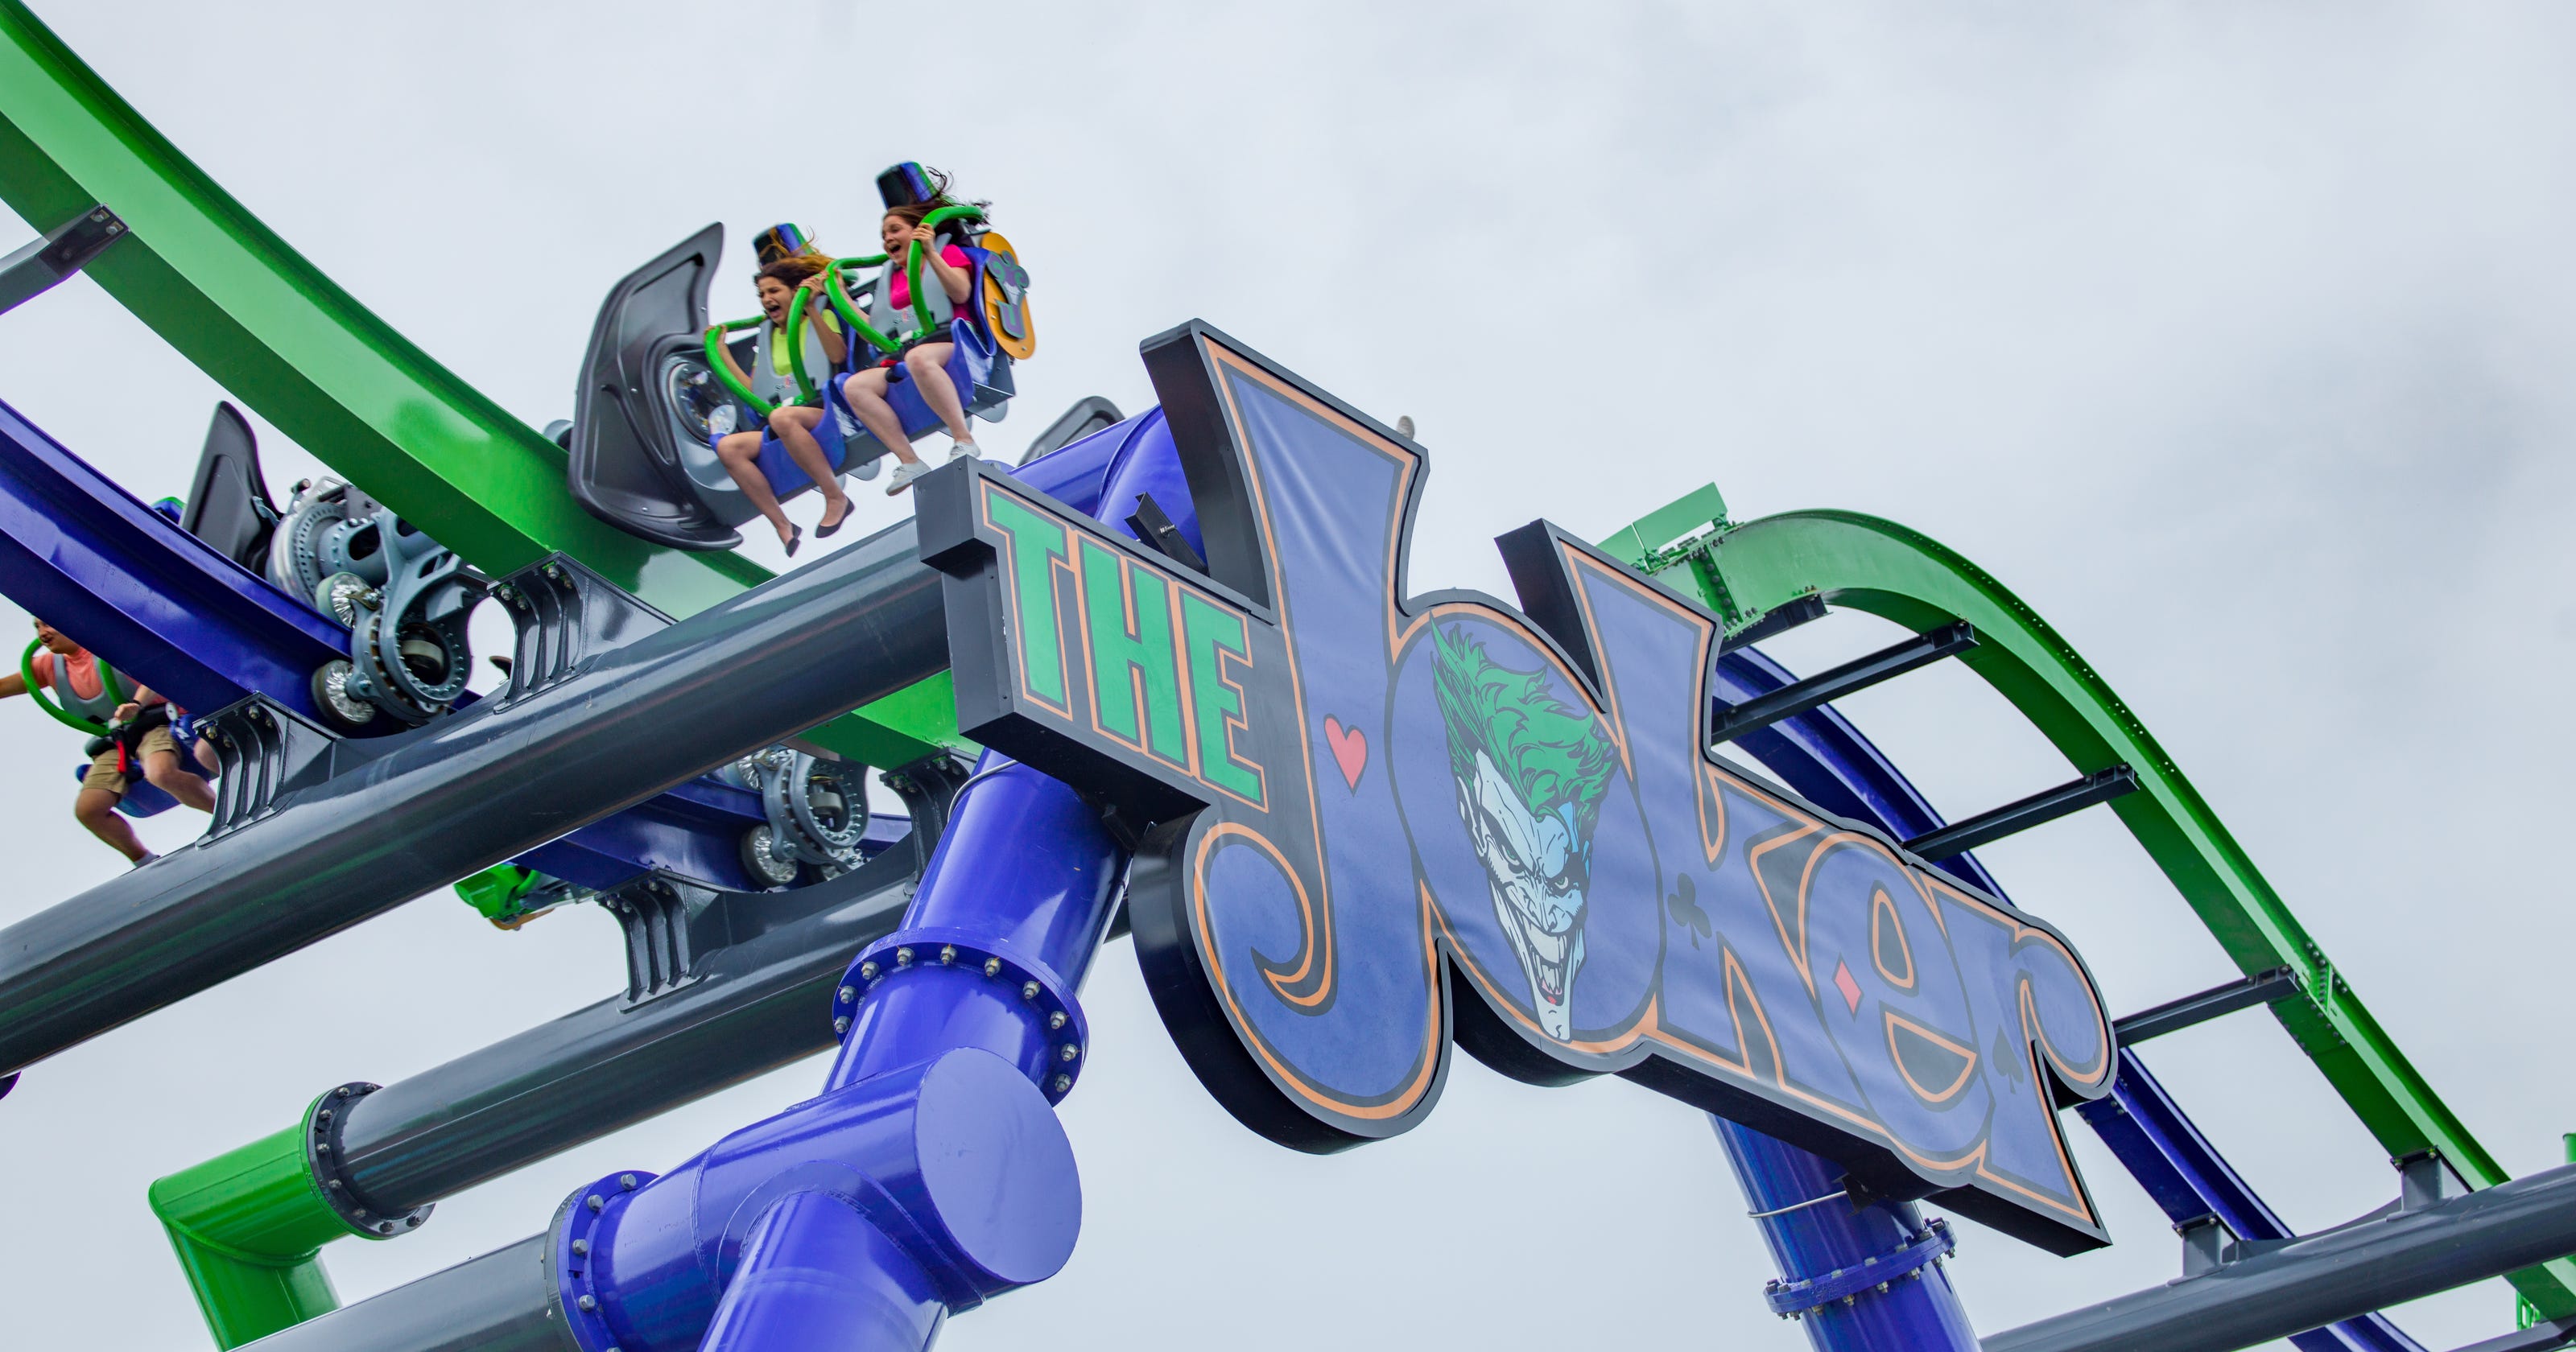 The Joker Coaster At Six Flags New England